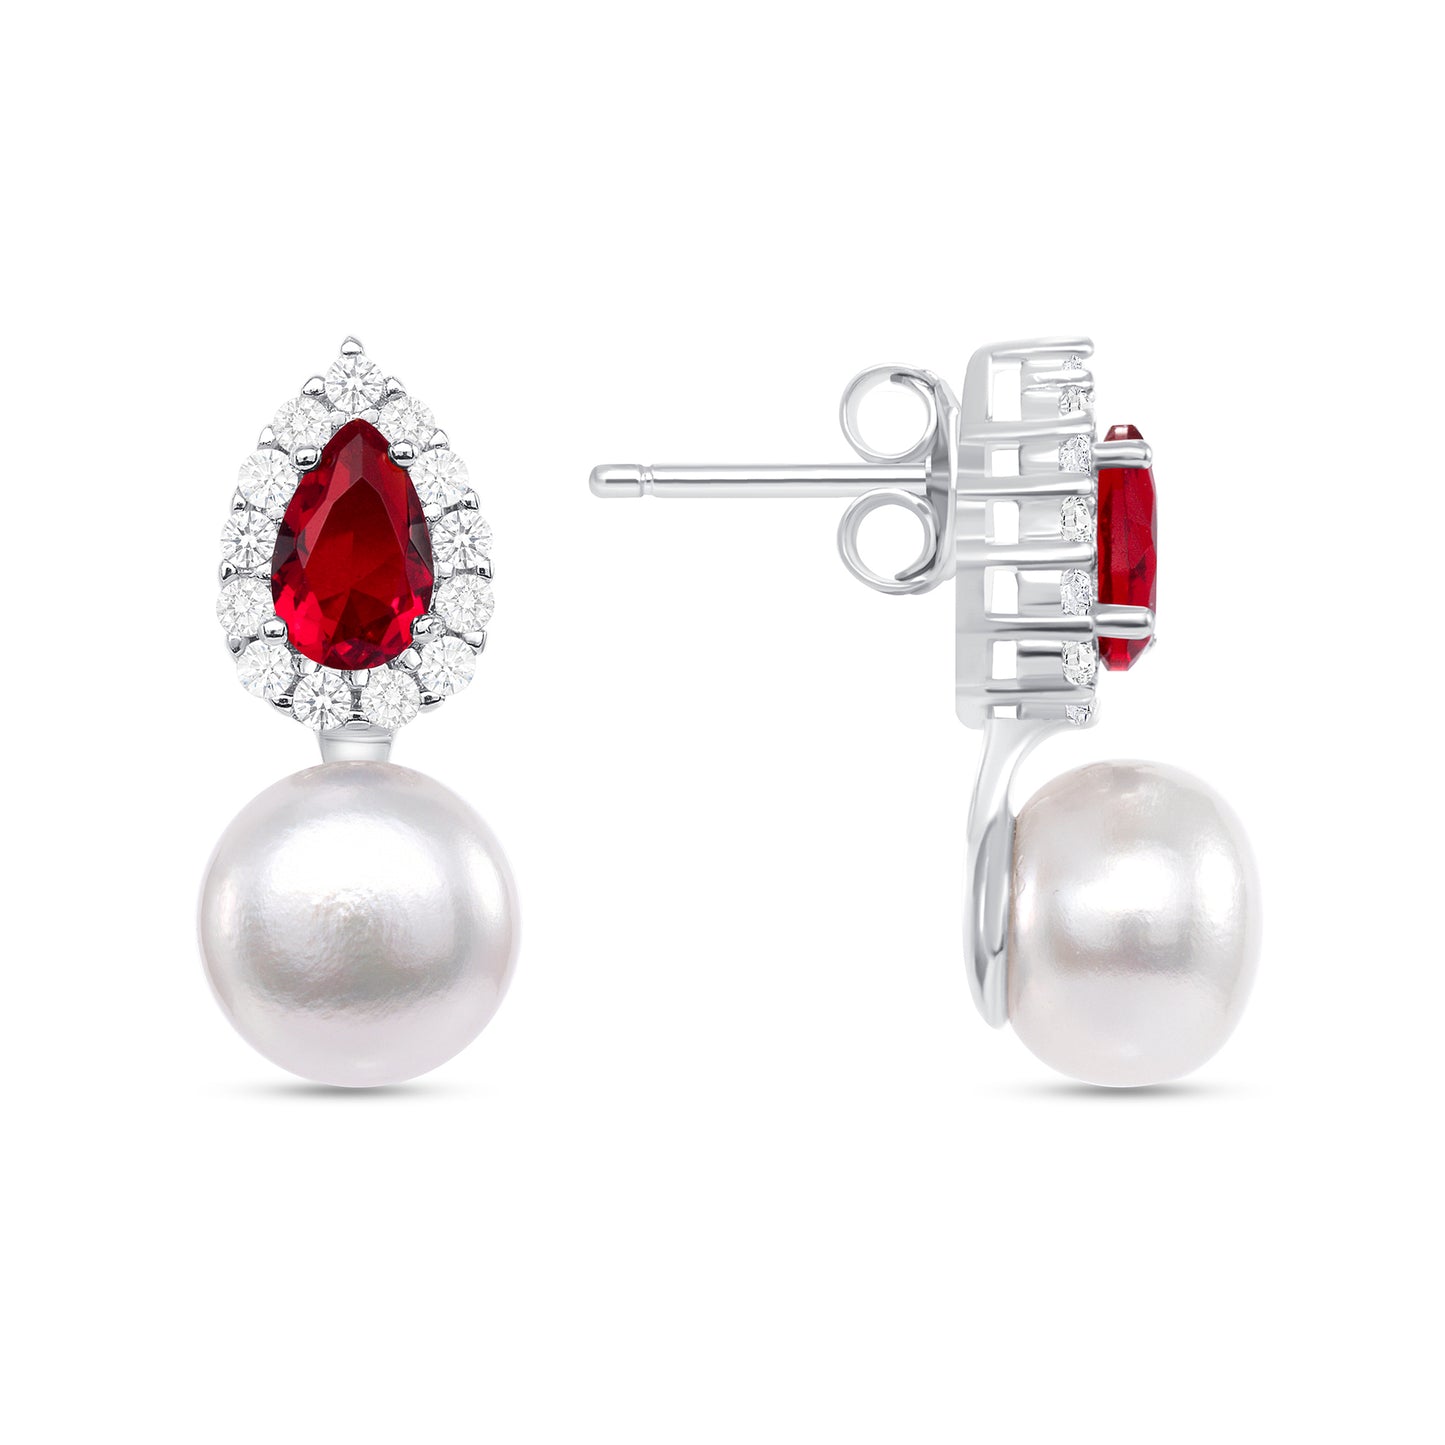 Silver 925 Rhodium Plated Pear Shaped Red Cubic Zirconia w/ White Pearl Earring. GE4313RED